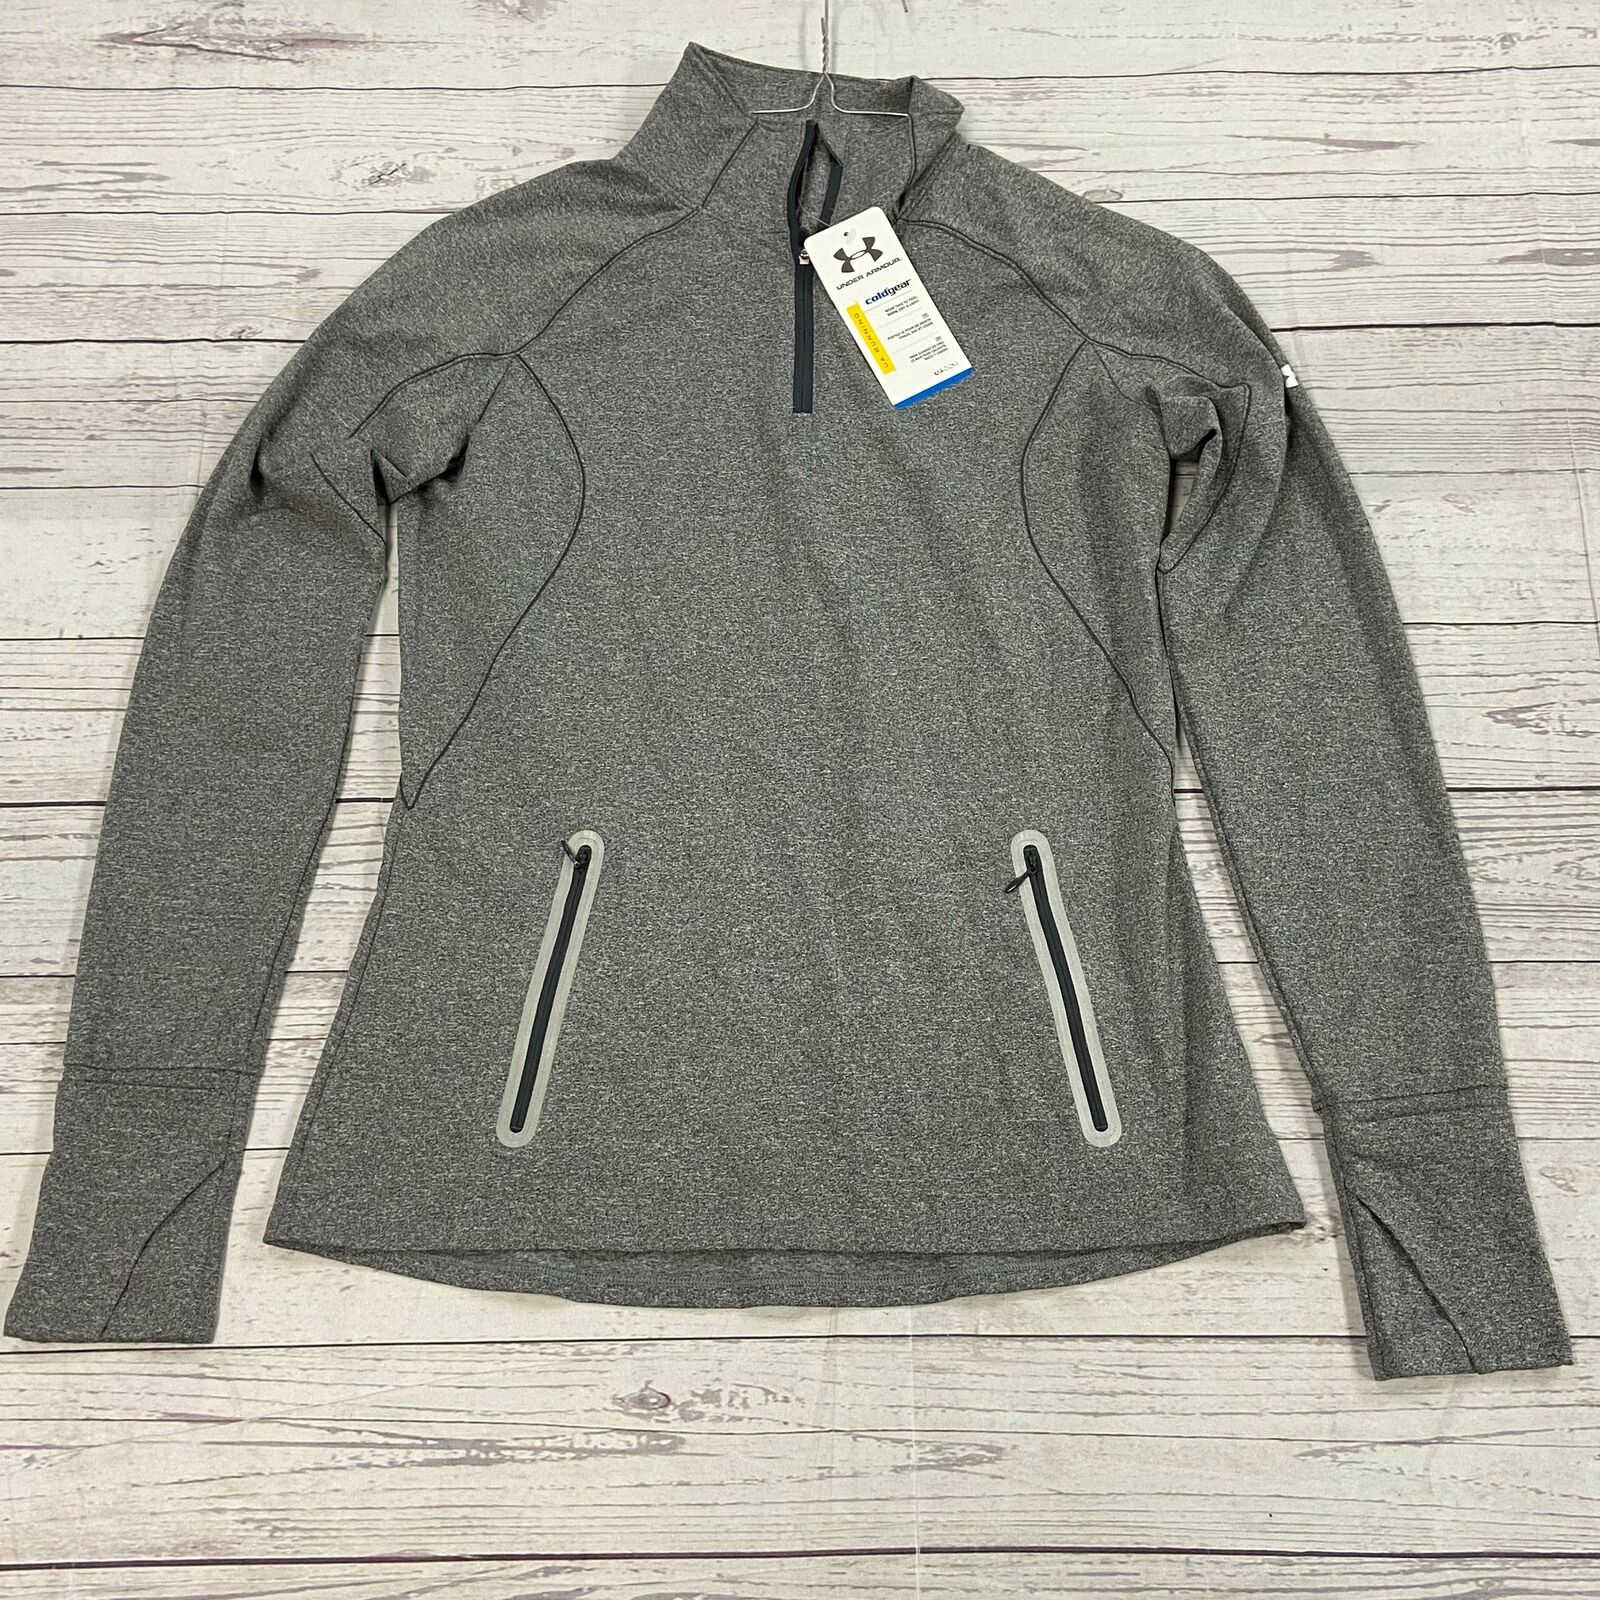 Under Armour Gray 1/4 Zip Pullover Long Sleeve Shirt Woman’s Size M NEW Semi Fit